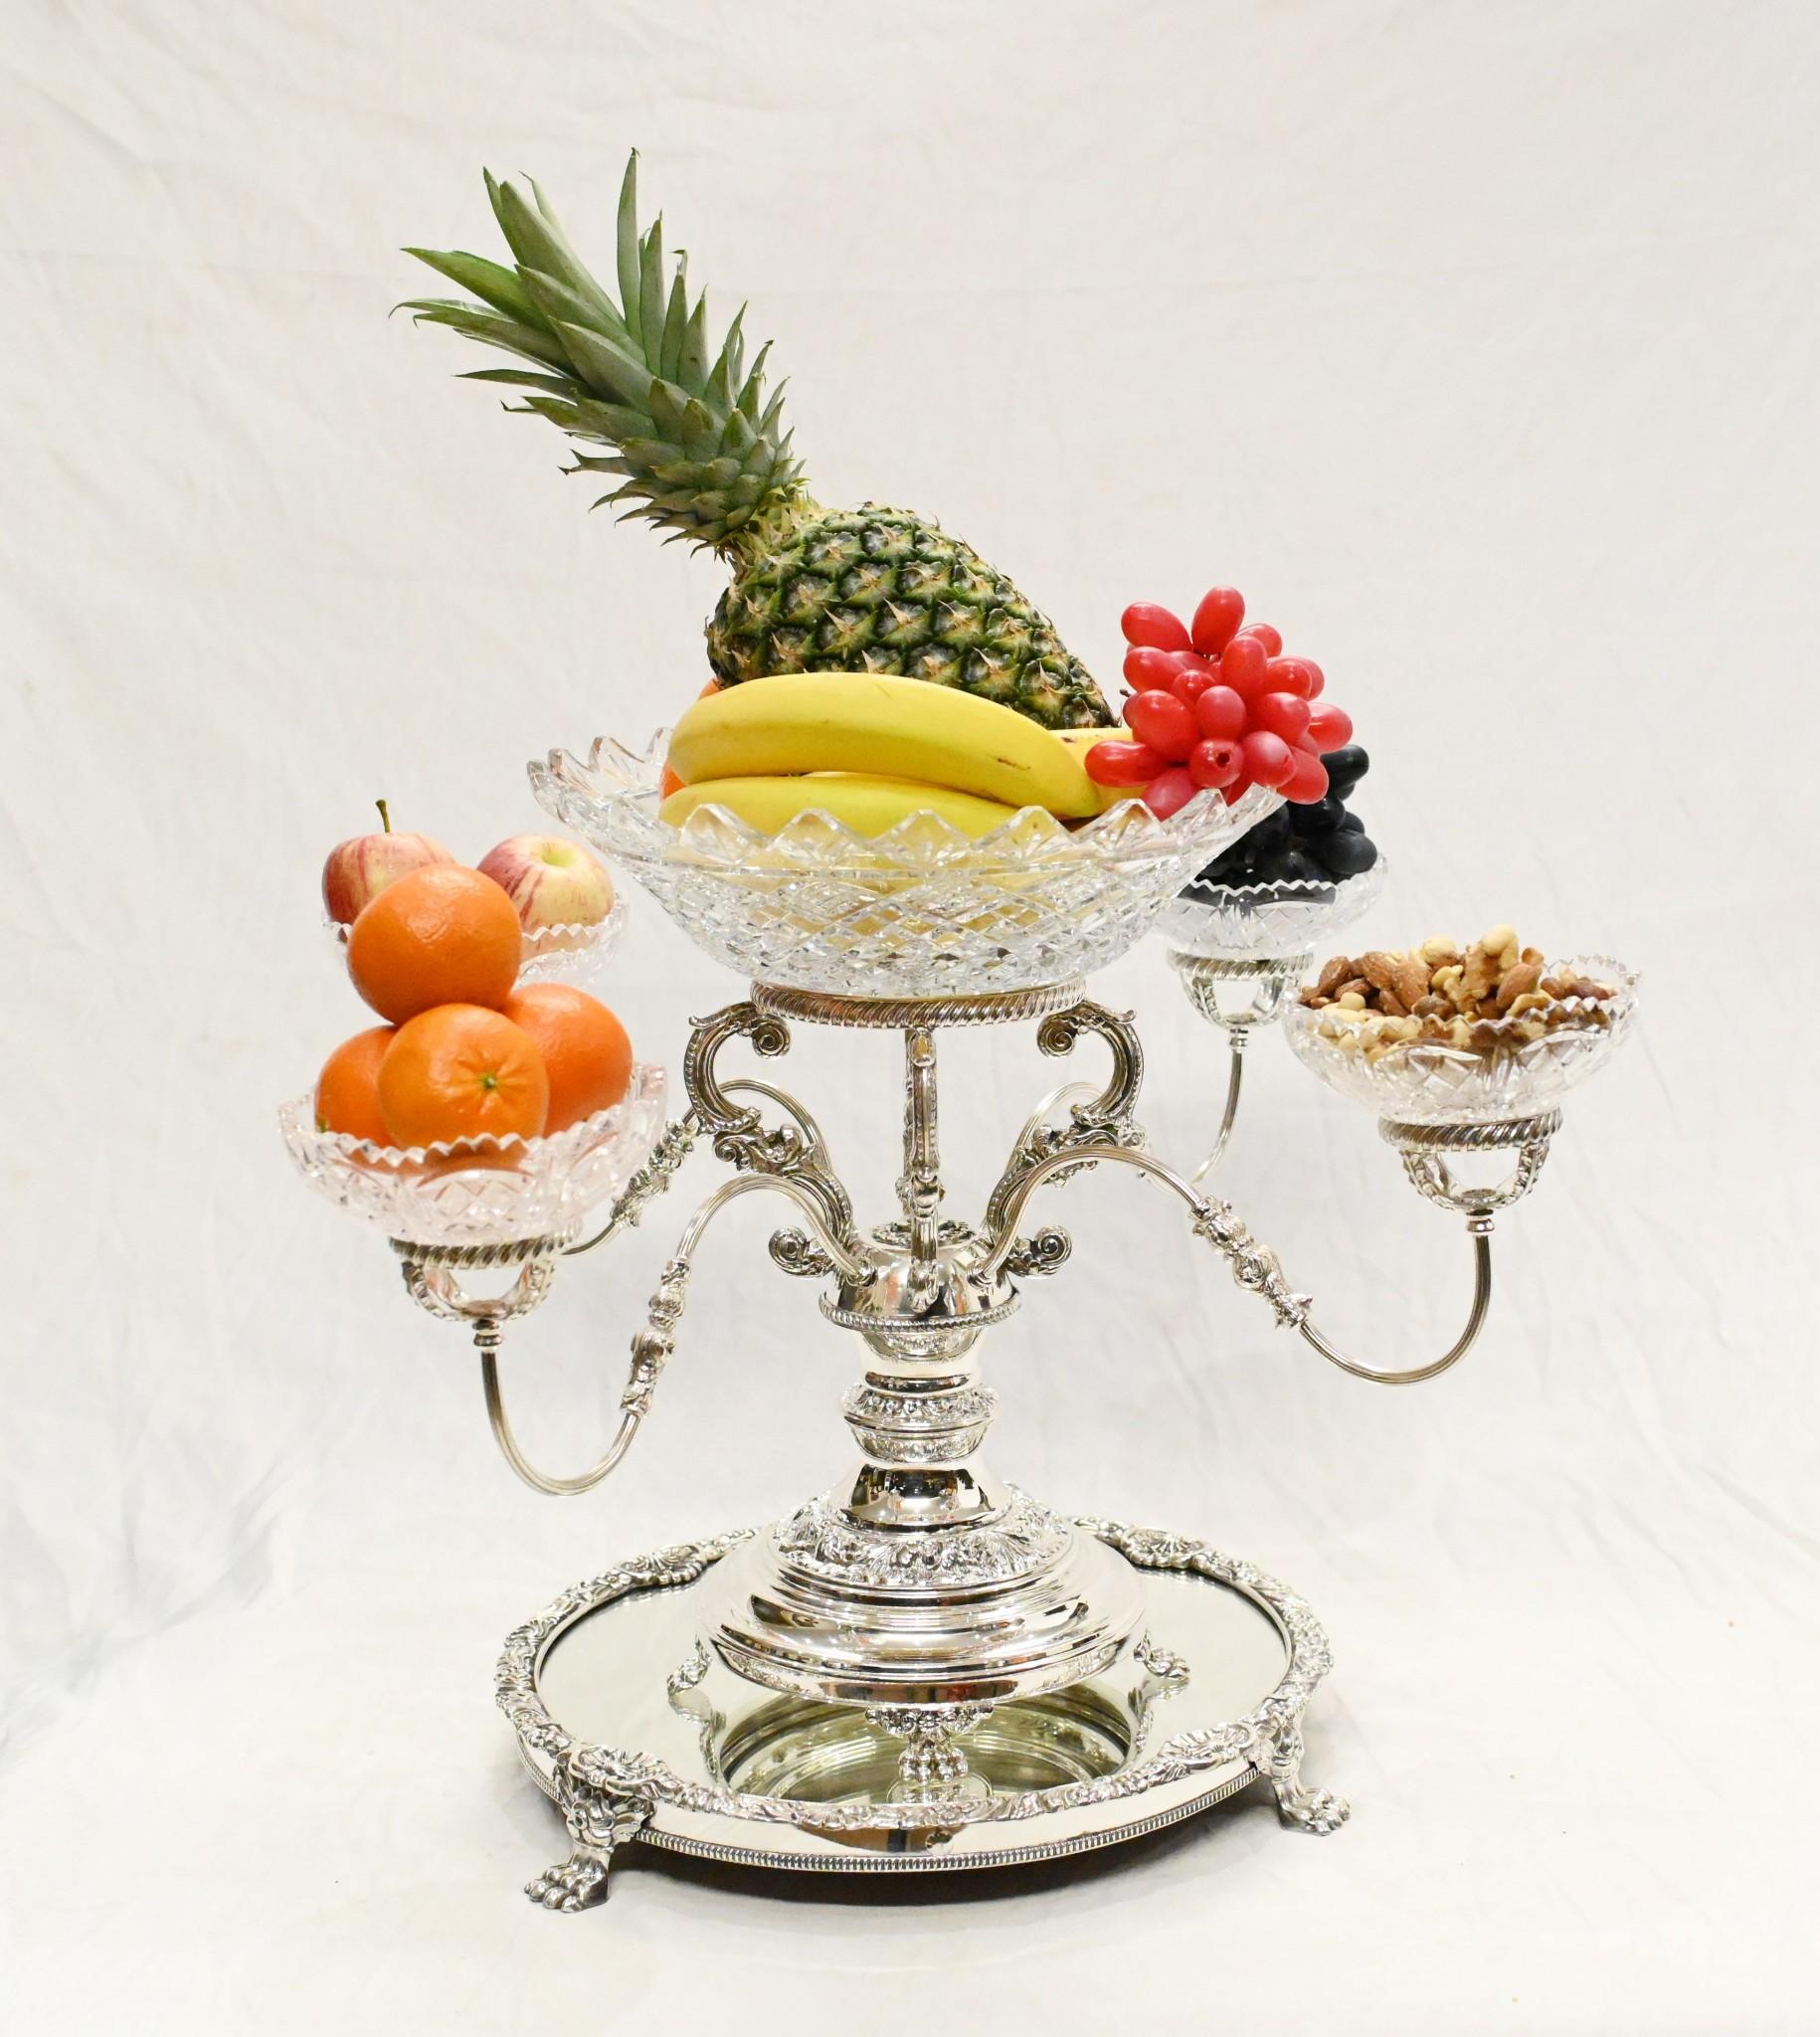 Delightful Sheffield silver plate epergne or centrepiece
Great piece for high end tablescaping
Main central crystal glass bowl surrounded by four smaller glass bowls
Patina to the silver plate beautiful
Stands on the glass round plate which is